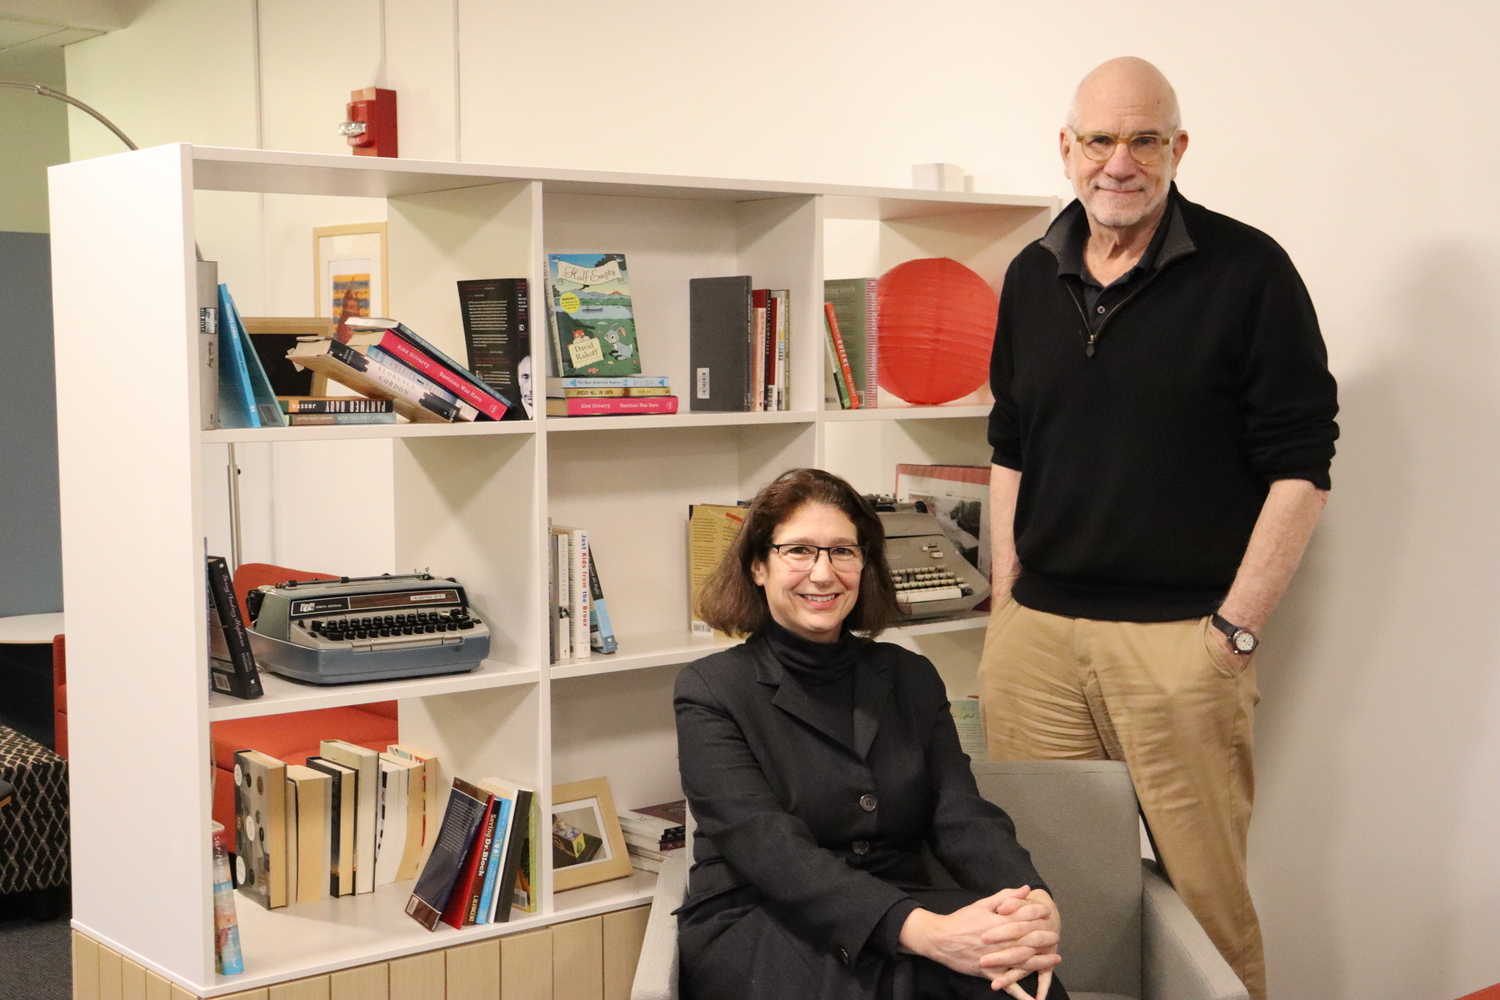 Robert Reeves and Carla Cagliotti in the Rakoff Lounge at Stony Brook Southampton College. The pair have worked together for many years and are leading the Lichtenstein Center for the Arts into the future. CAILIN RILEY